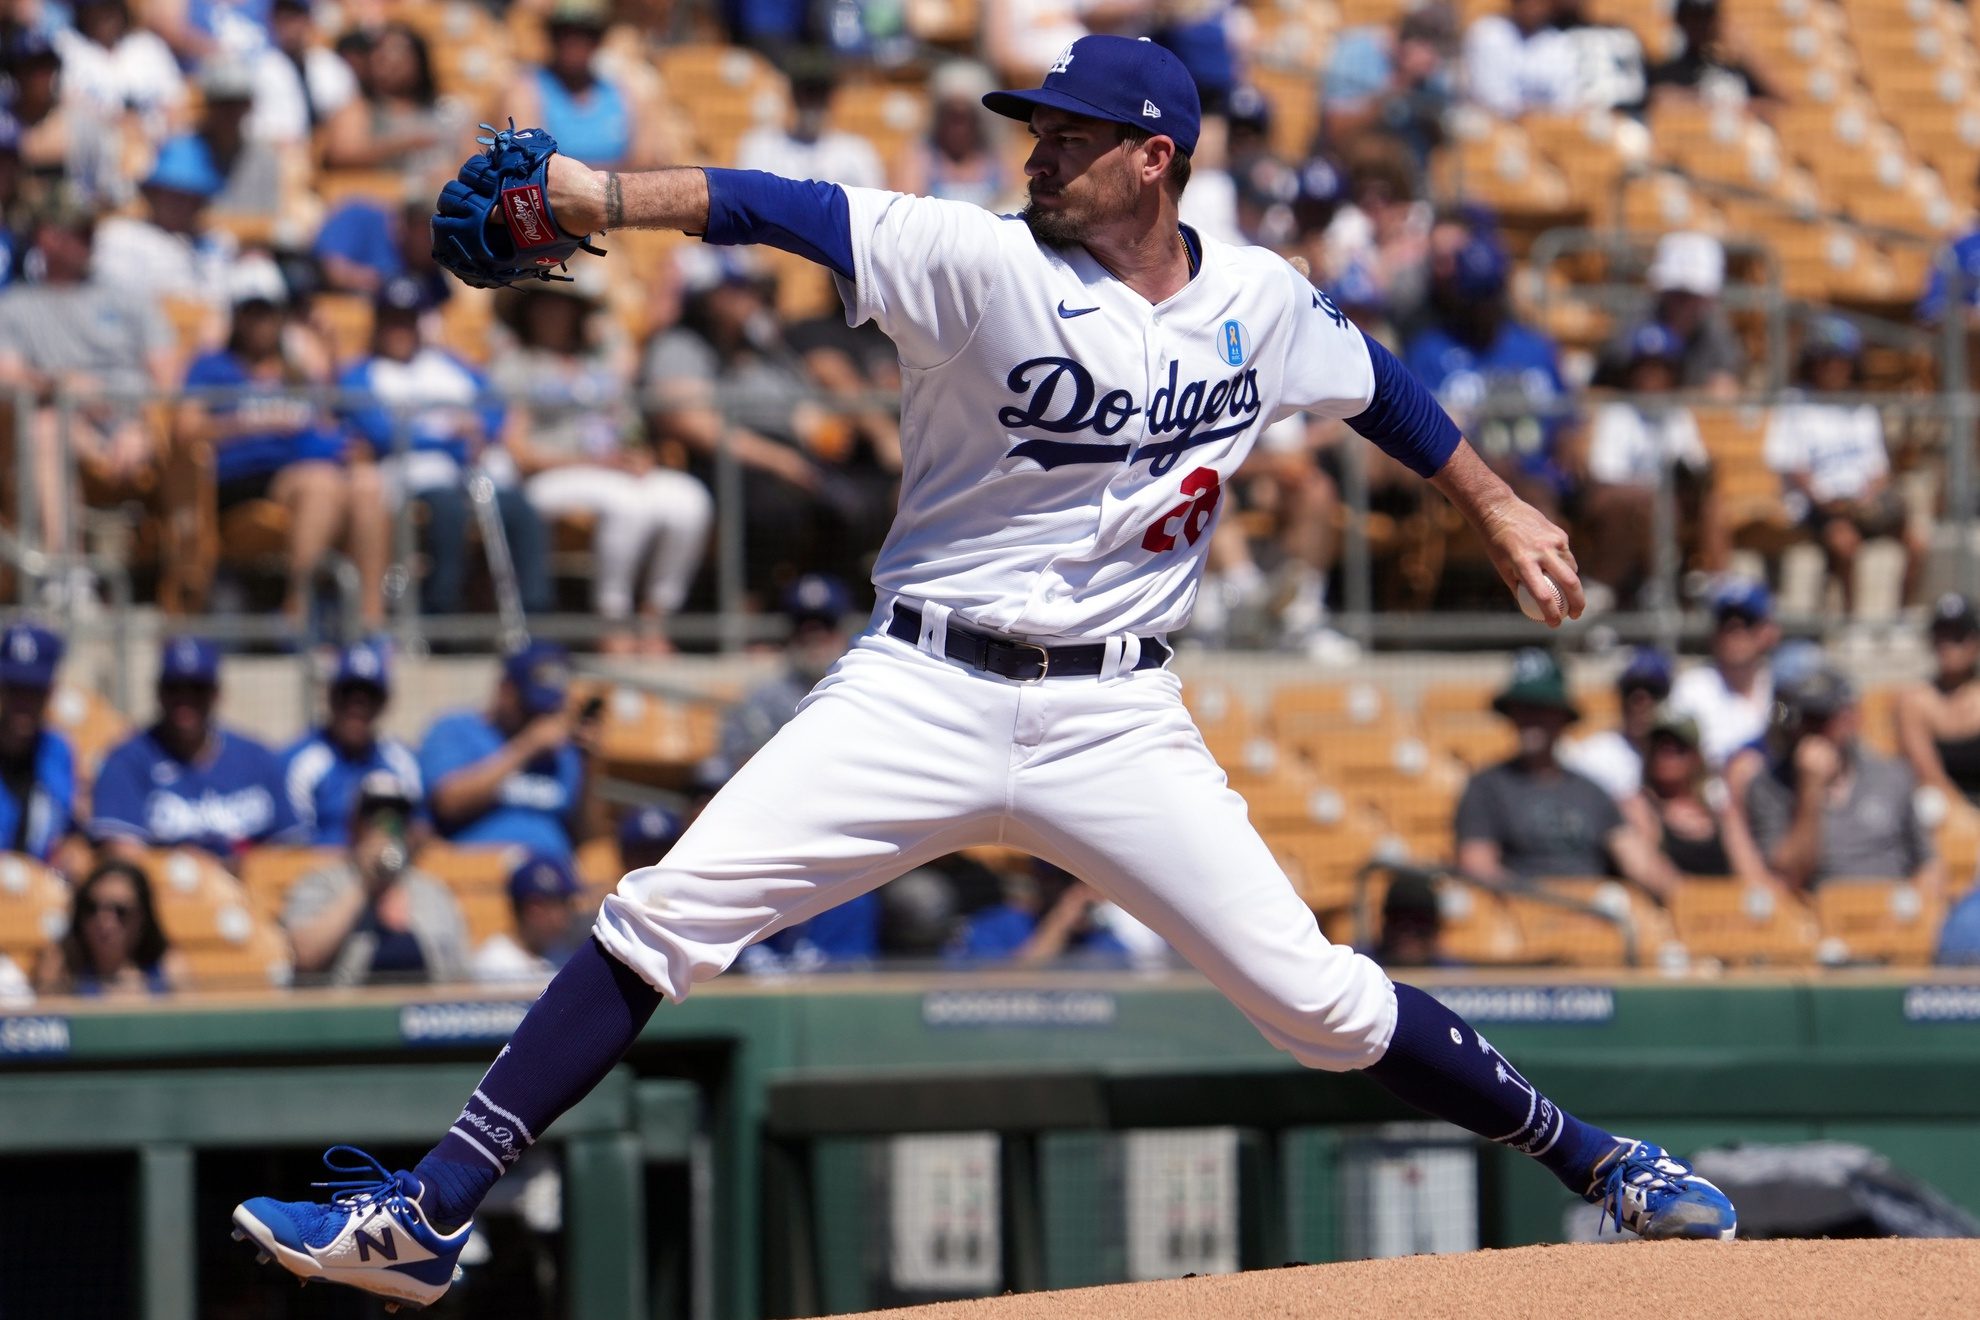 Dodgers: Andrew Heaney Set to Debut This Week